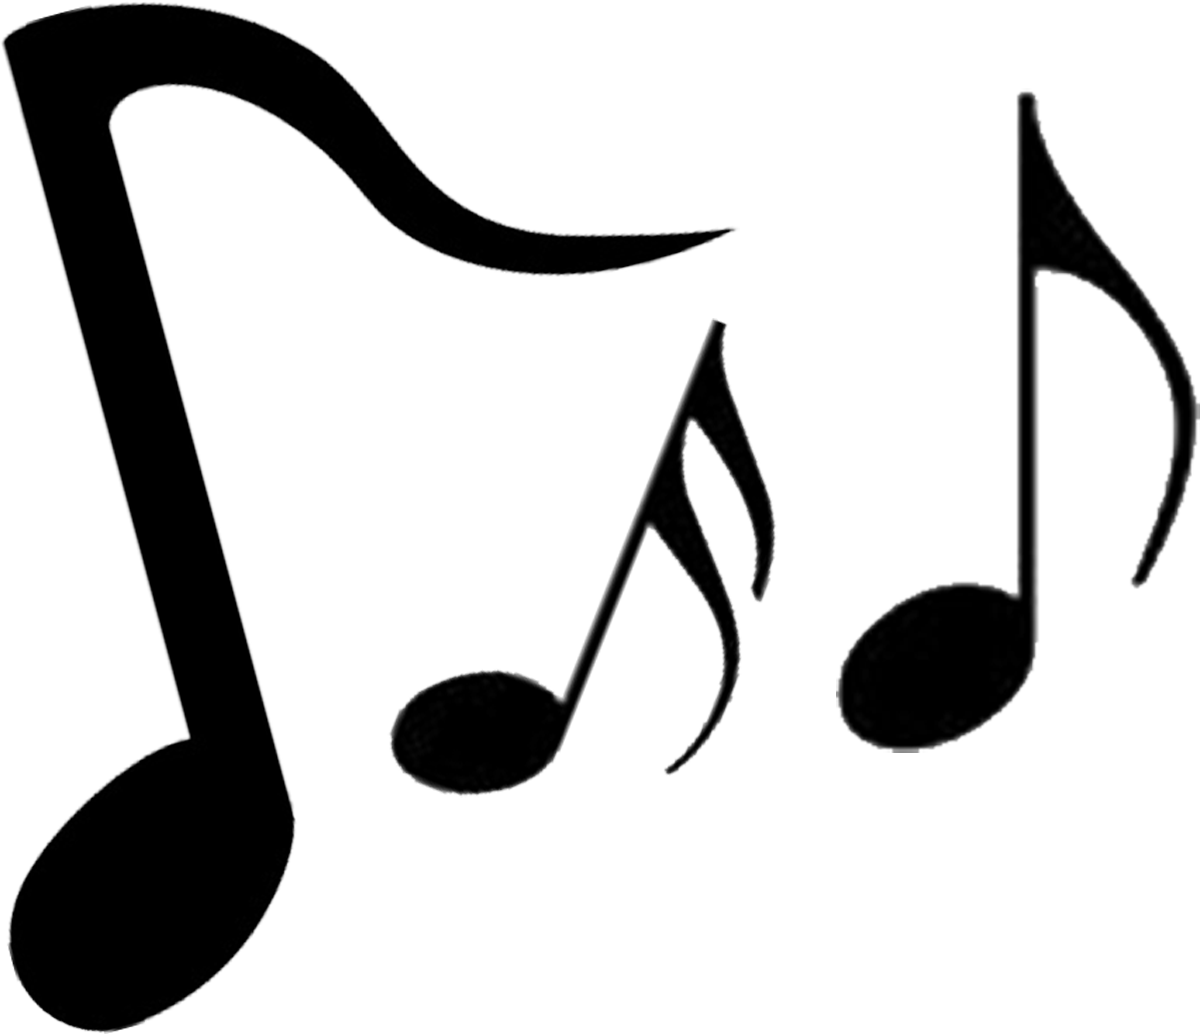 Pics for musical instruments. Words clipart band